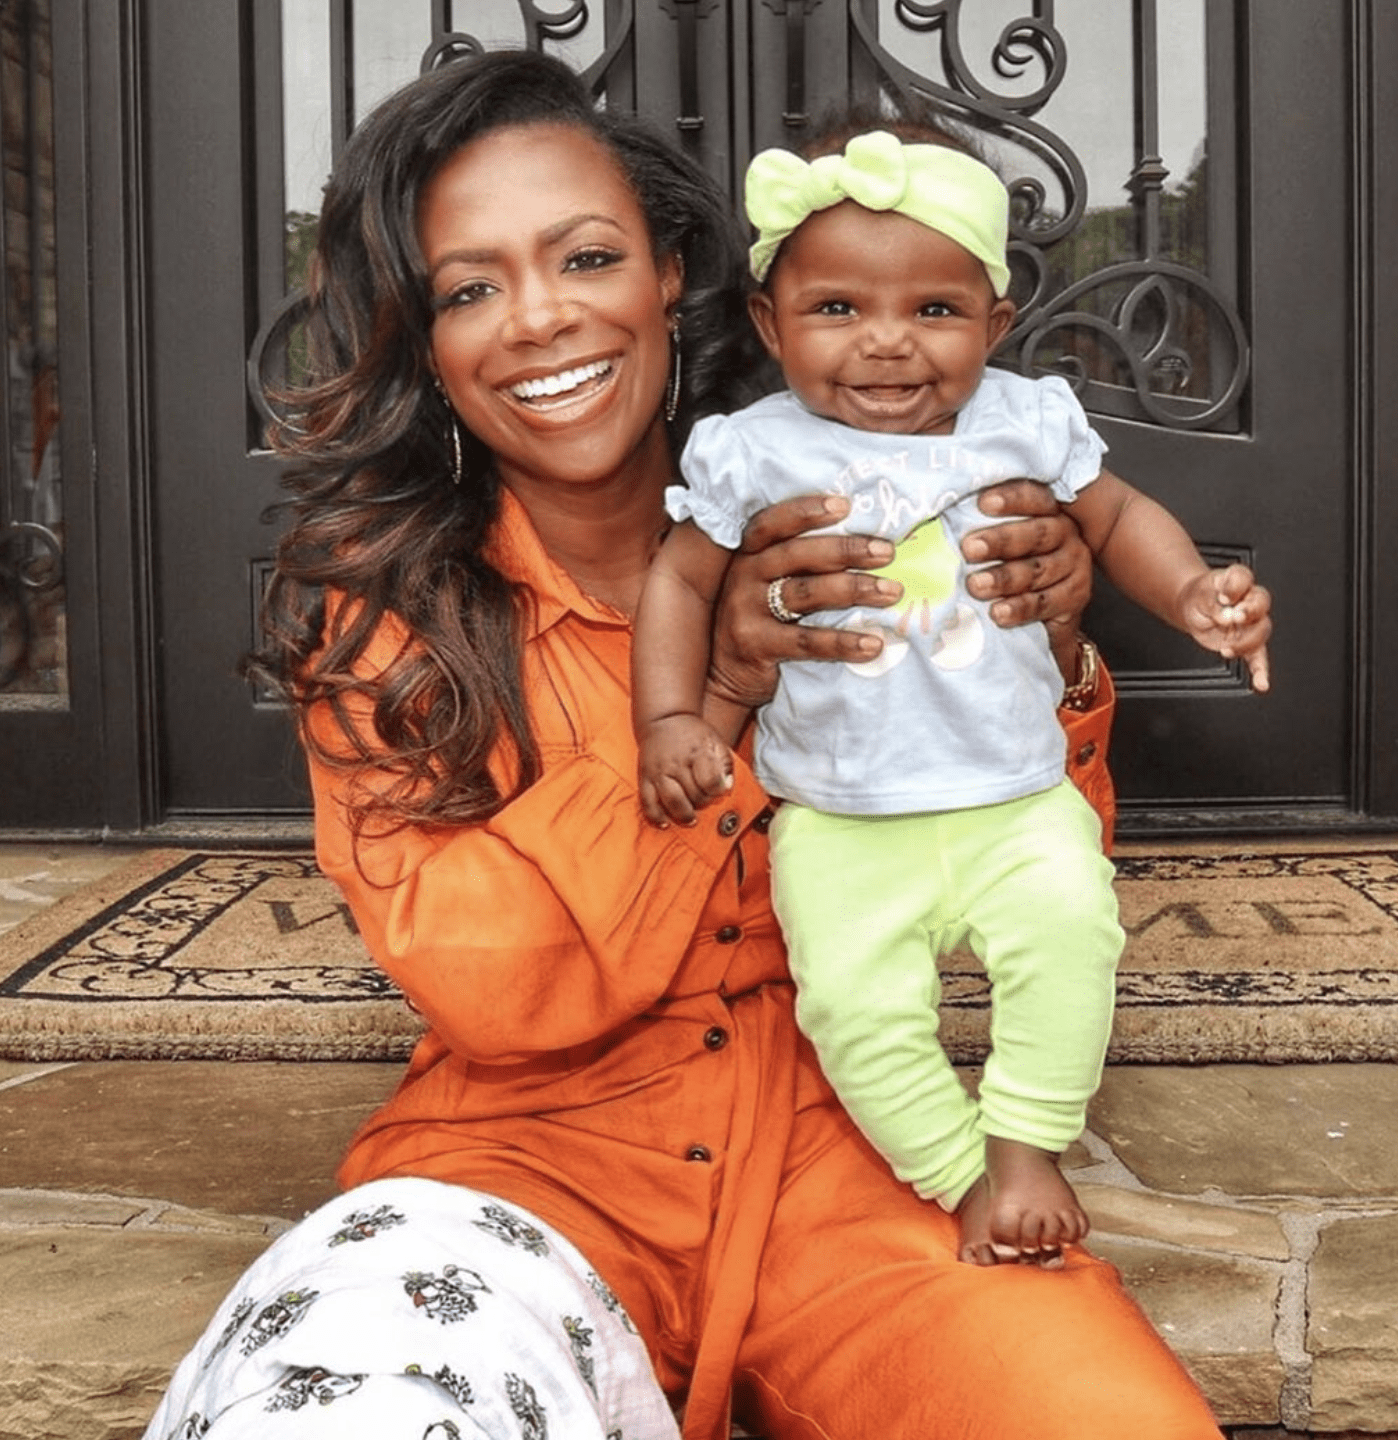 ”kandi-burruss-is-grateful-for-her-family-check-out-the-latest-pics-she-shared”